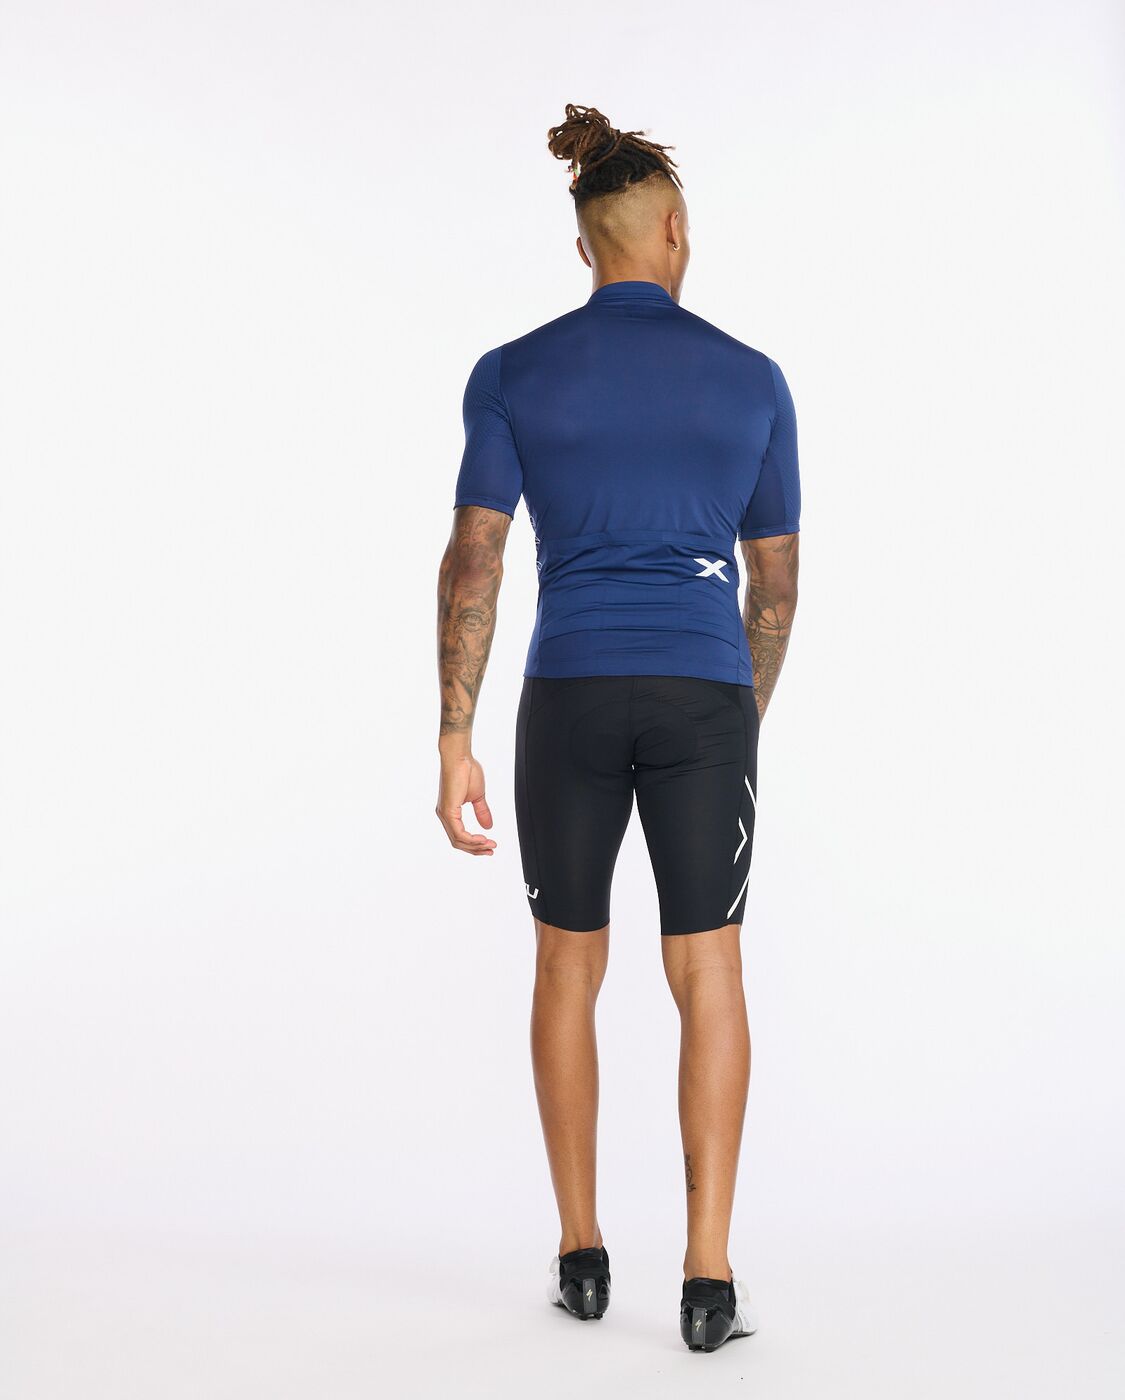 2XU South Africa - Mens Aero Short Sleeve Jersey - Medieval/White Reflective